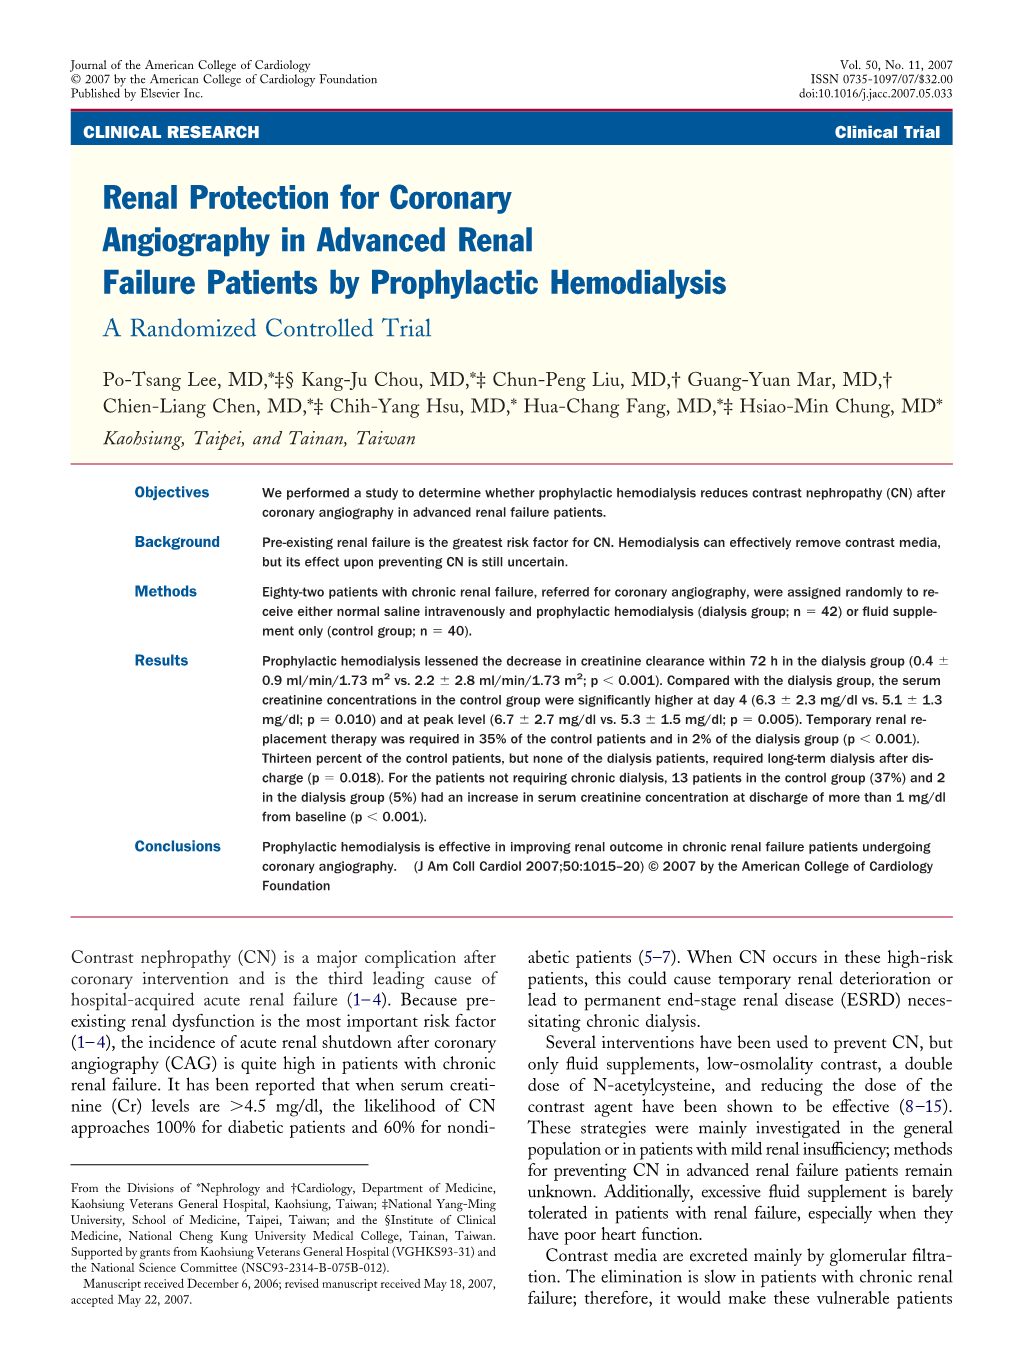 Renal Protection for Coronary Angiography in Advanced Renal Failure Patients by Prophylactic Hemodialysis a Randomized Controlled Trial